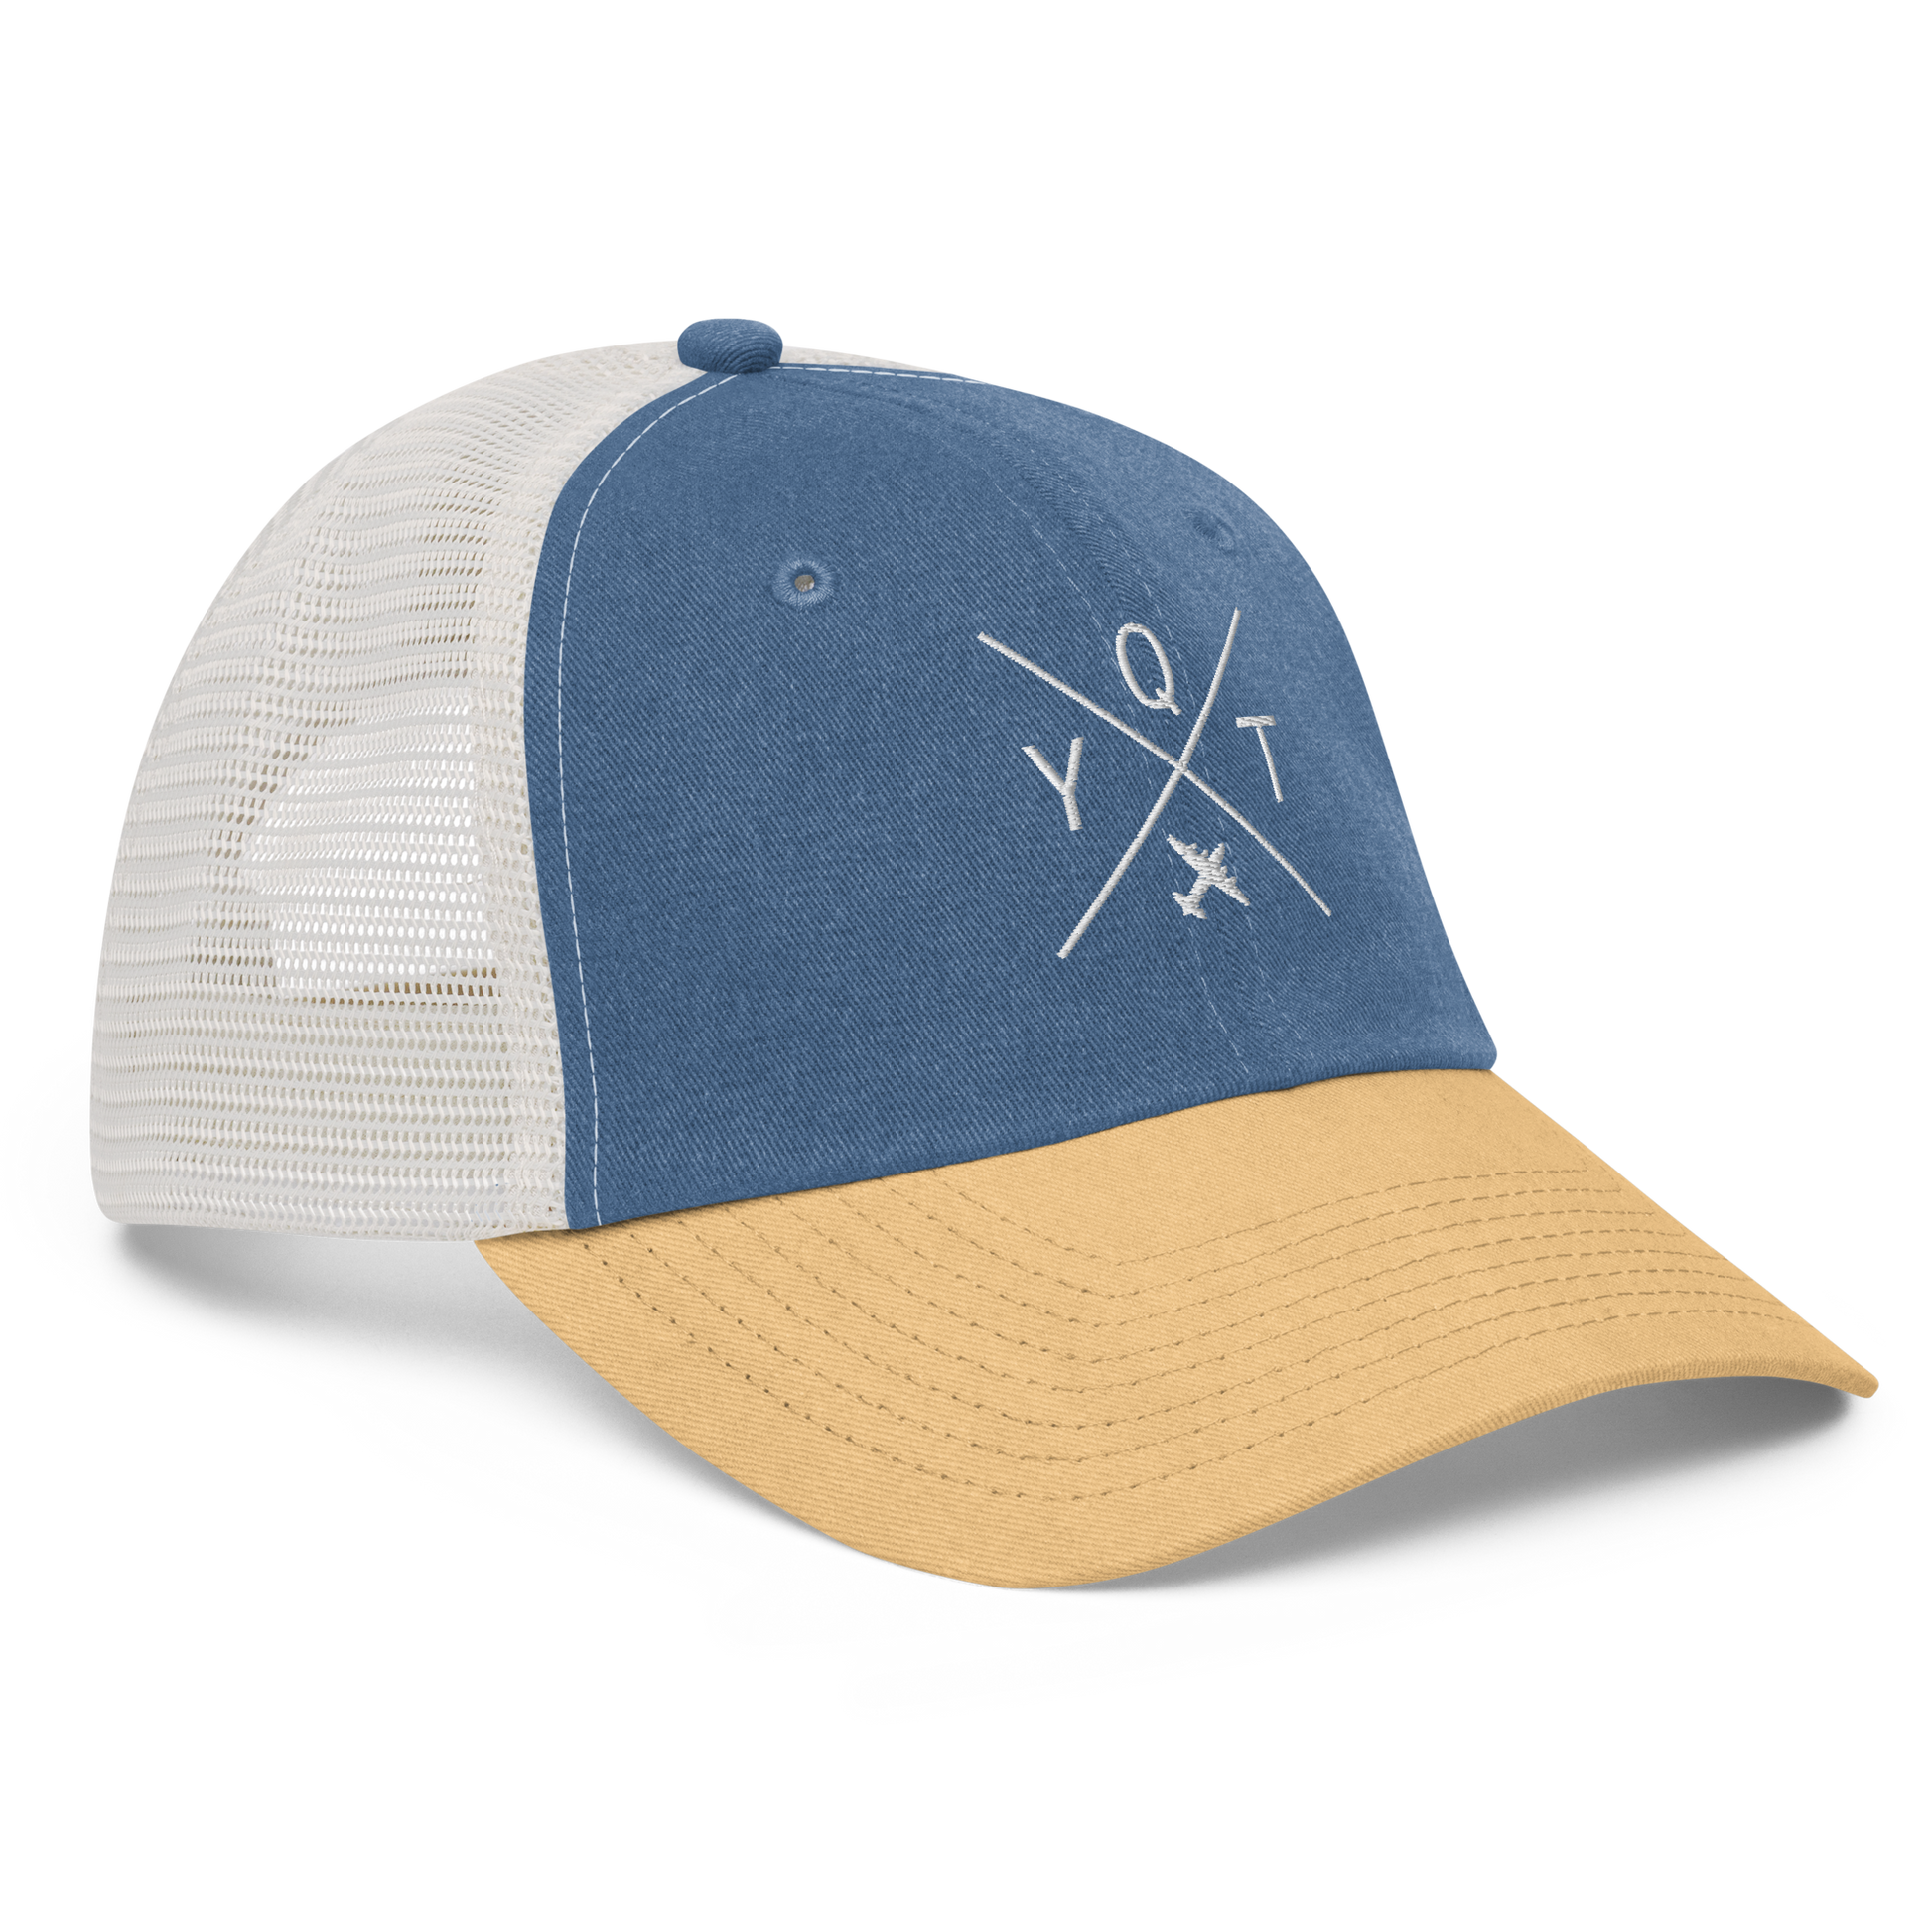 YHM Designs - YQT Thunder Bay Pigment-Dyed Trucker Cap - Crossed-X Design with Airport Code and Vintage Propliner - White Embroidery - Image 18